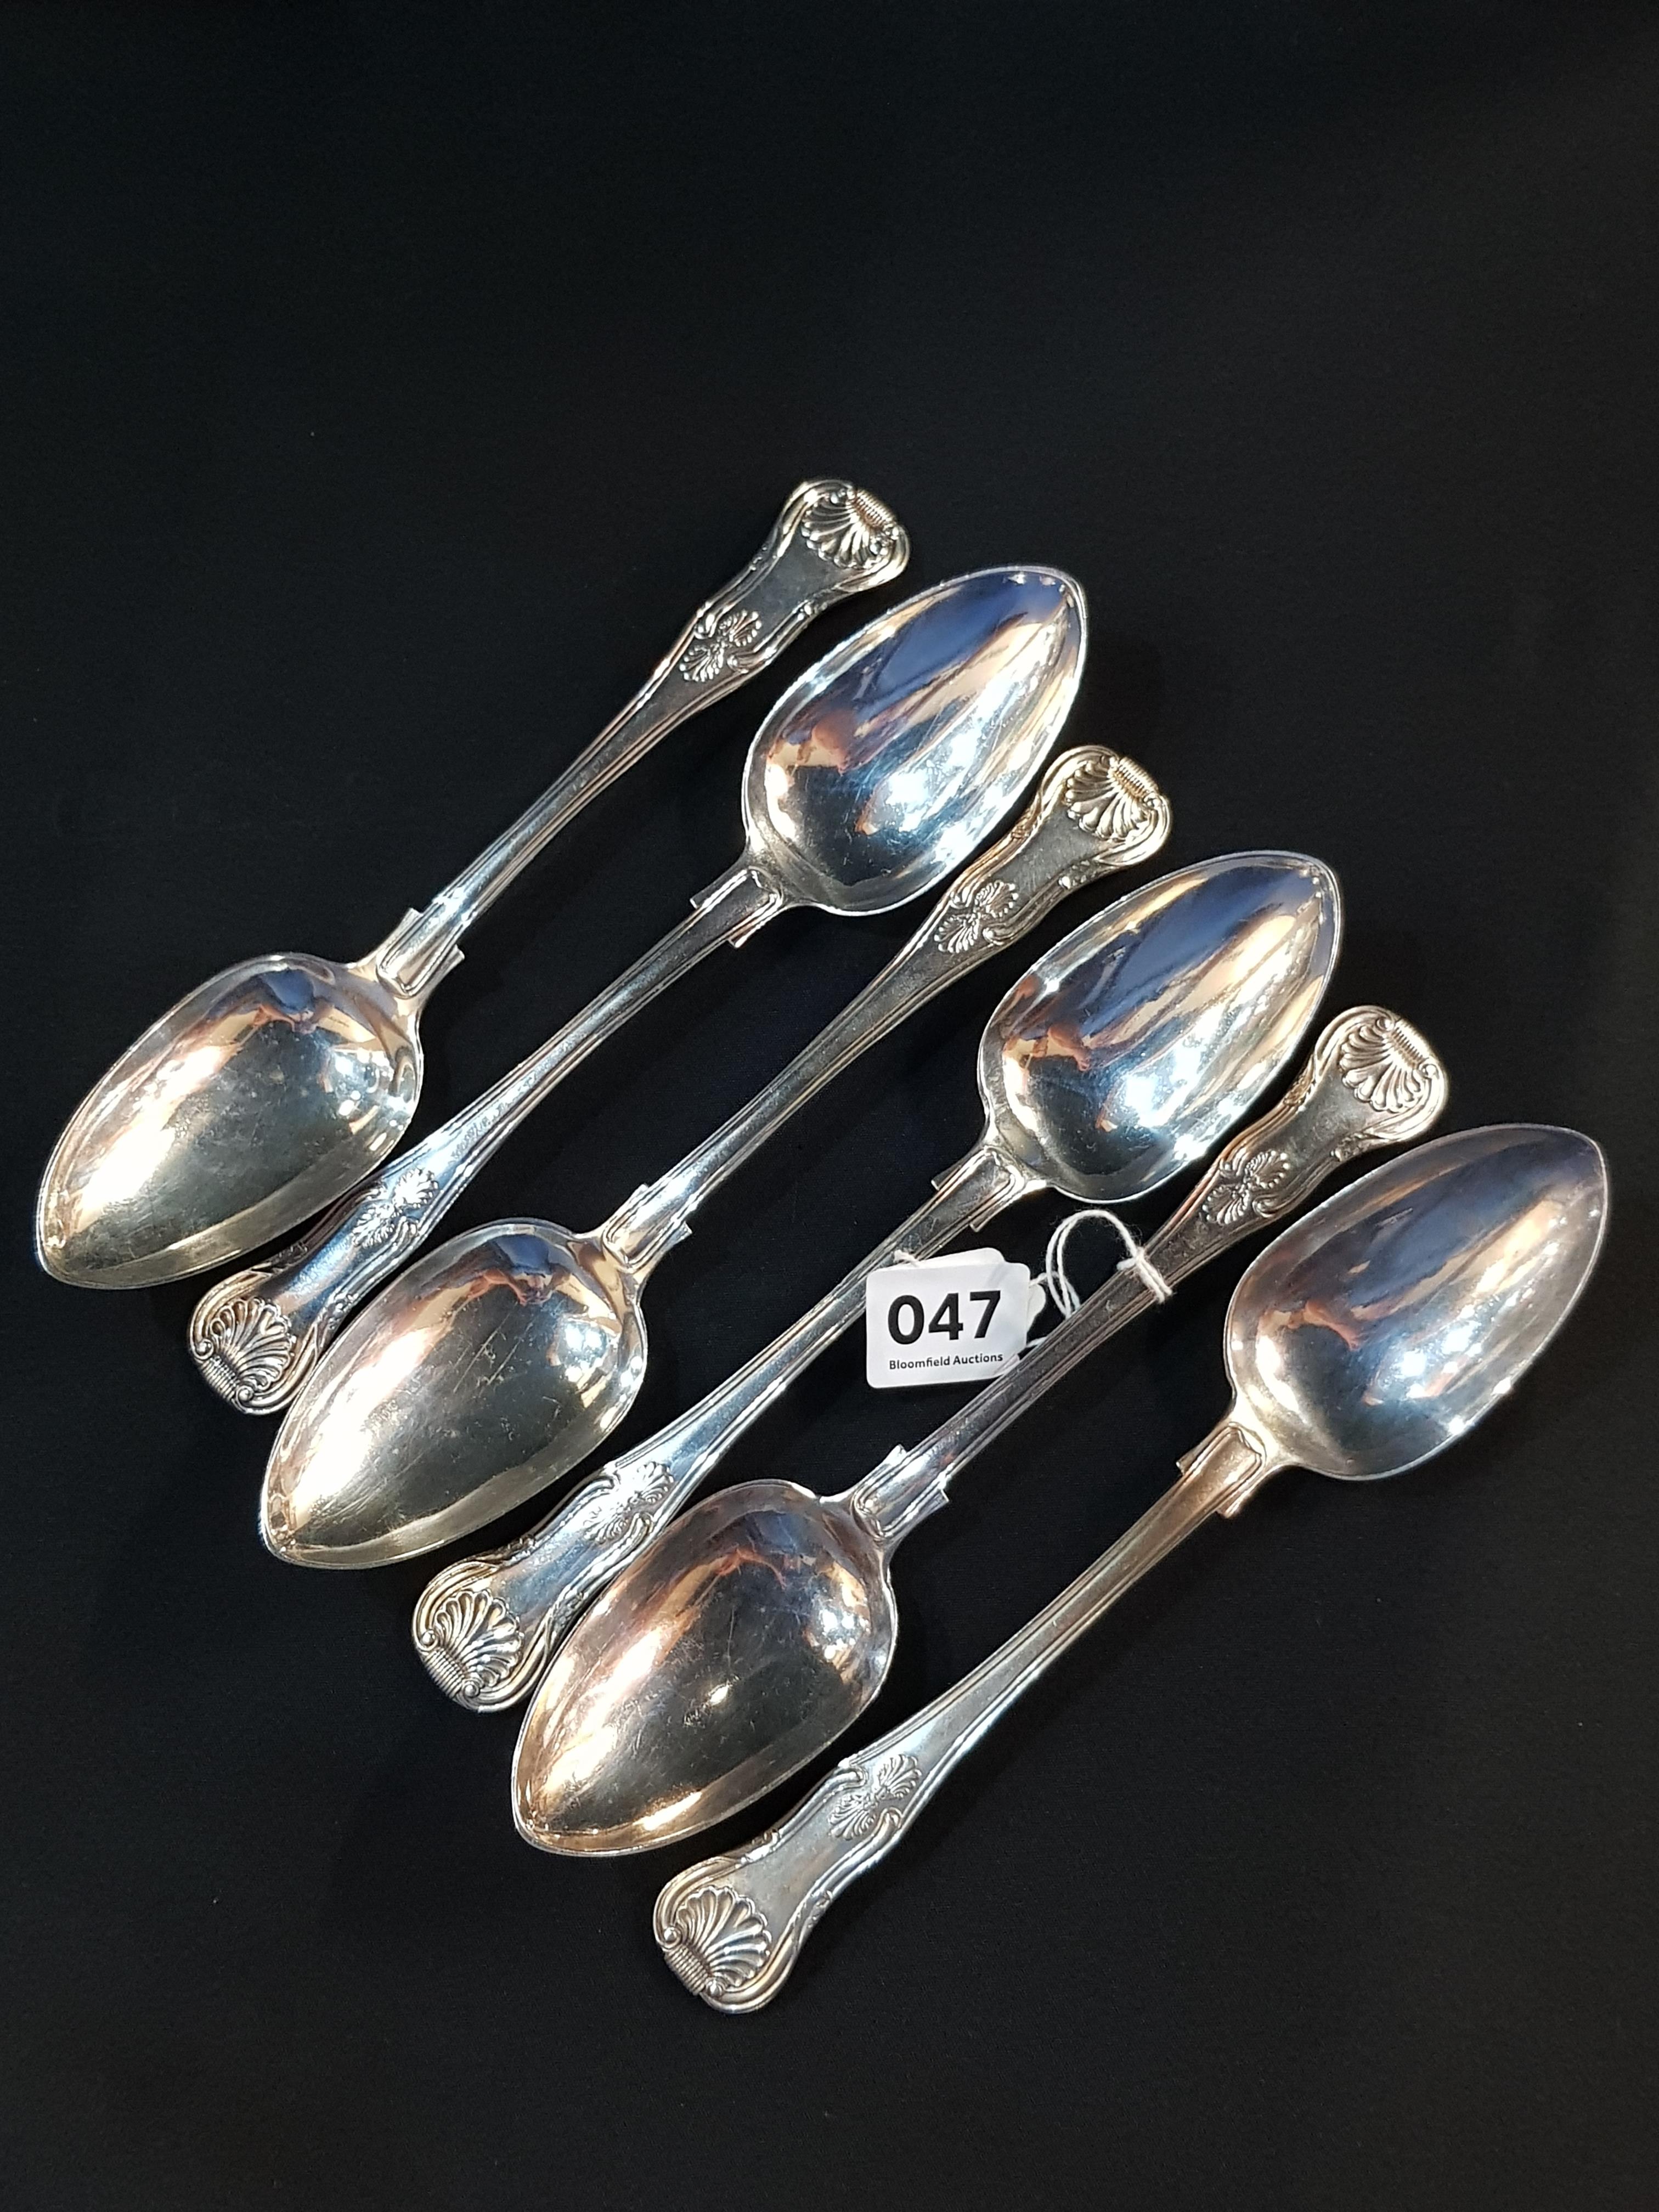 SET OF 6 GEORGIAN SOLID SILVER KINGS PATTERN DINNER SPOONS DATED 1827-28 TOTAL WEIGHT 594G MAKER